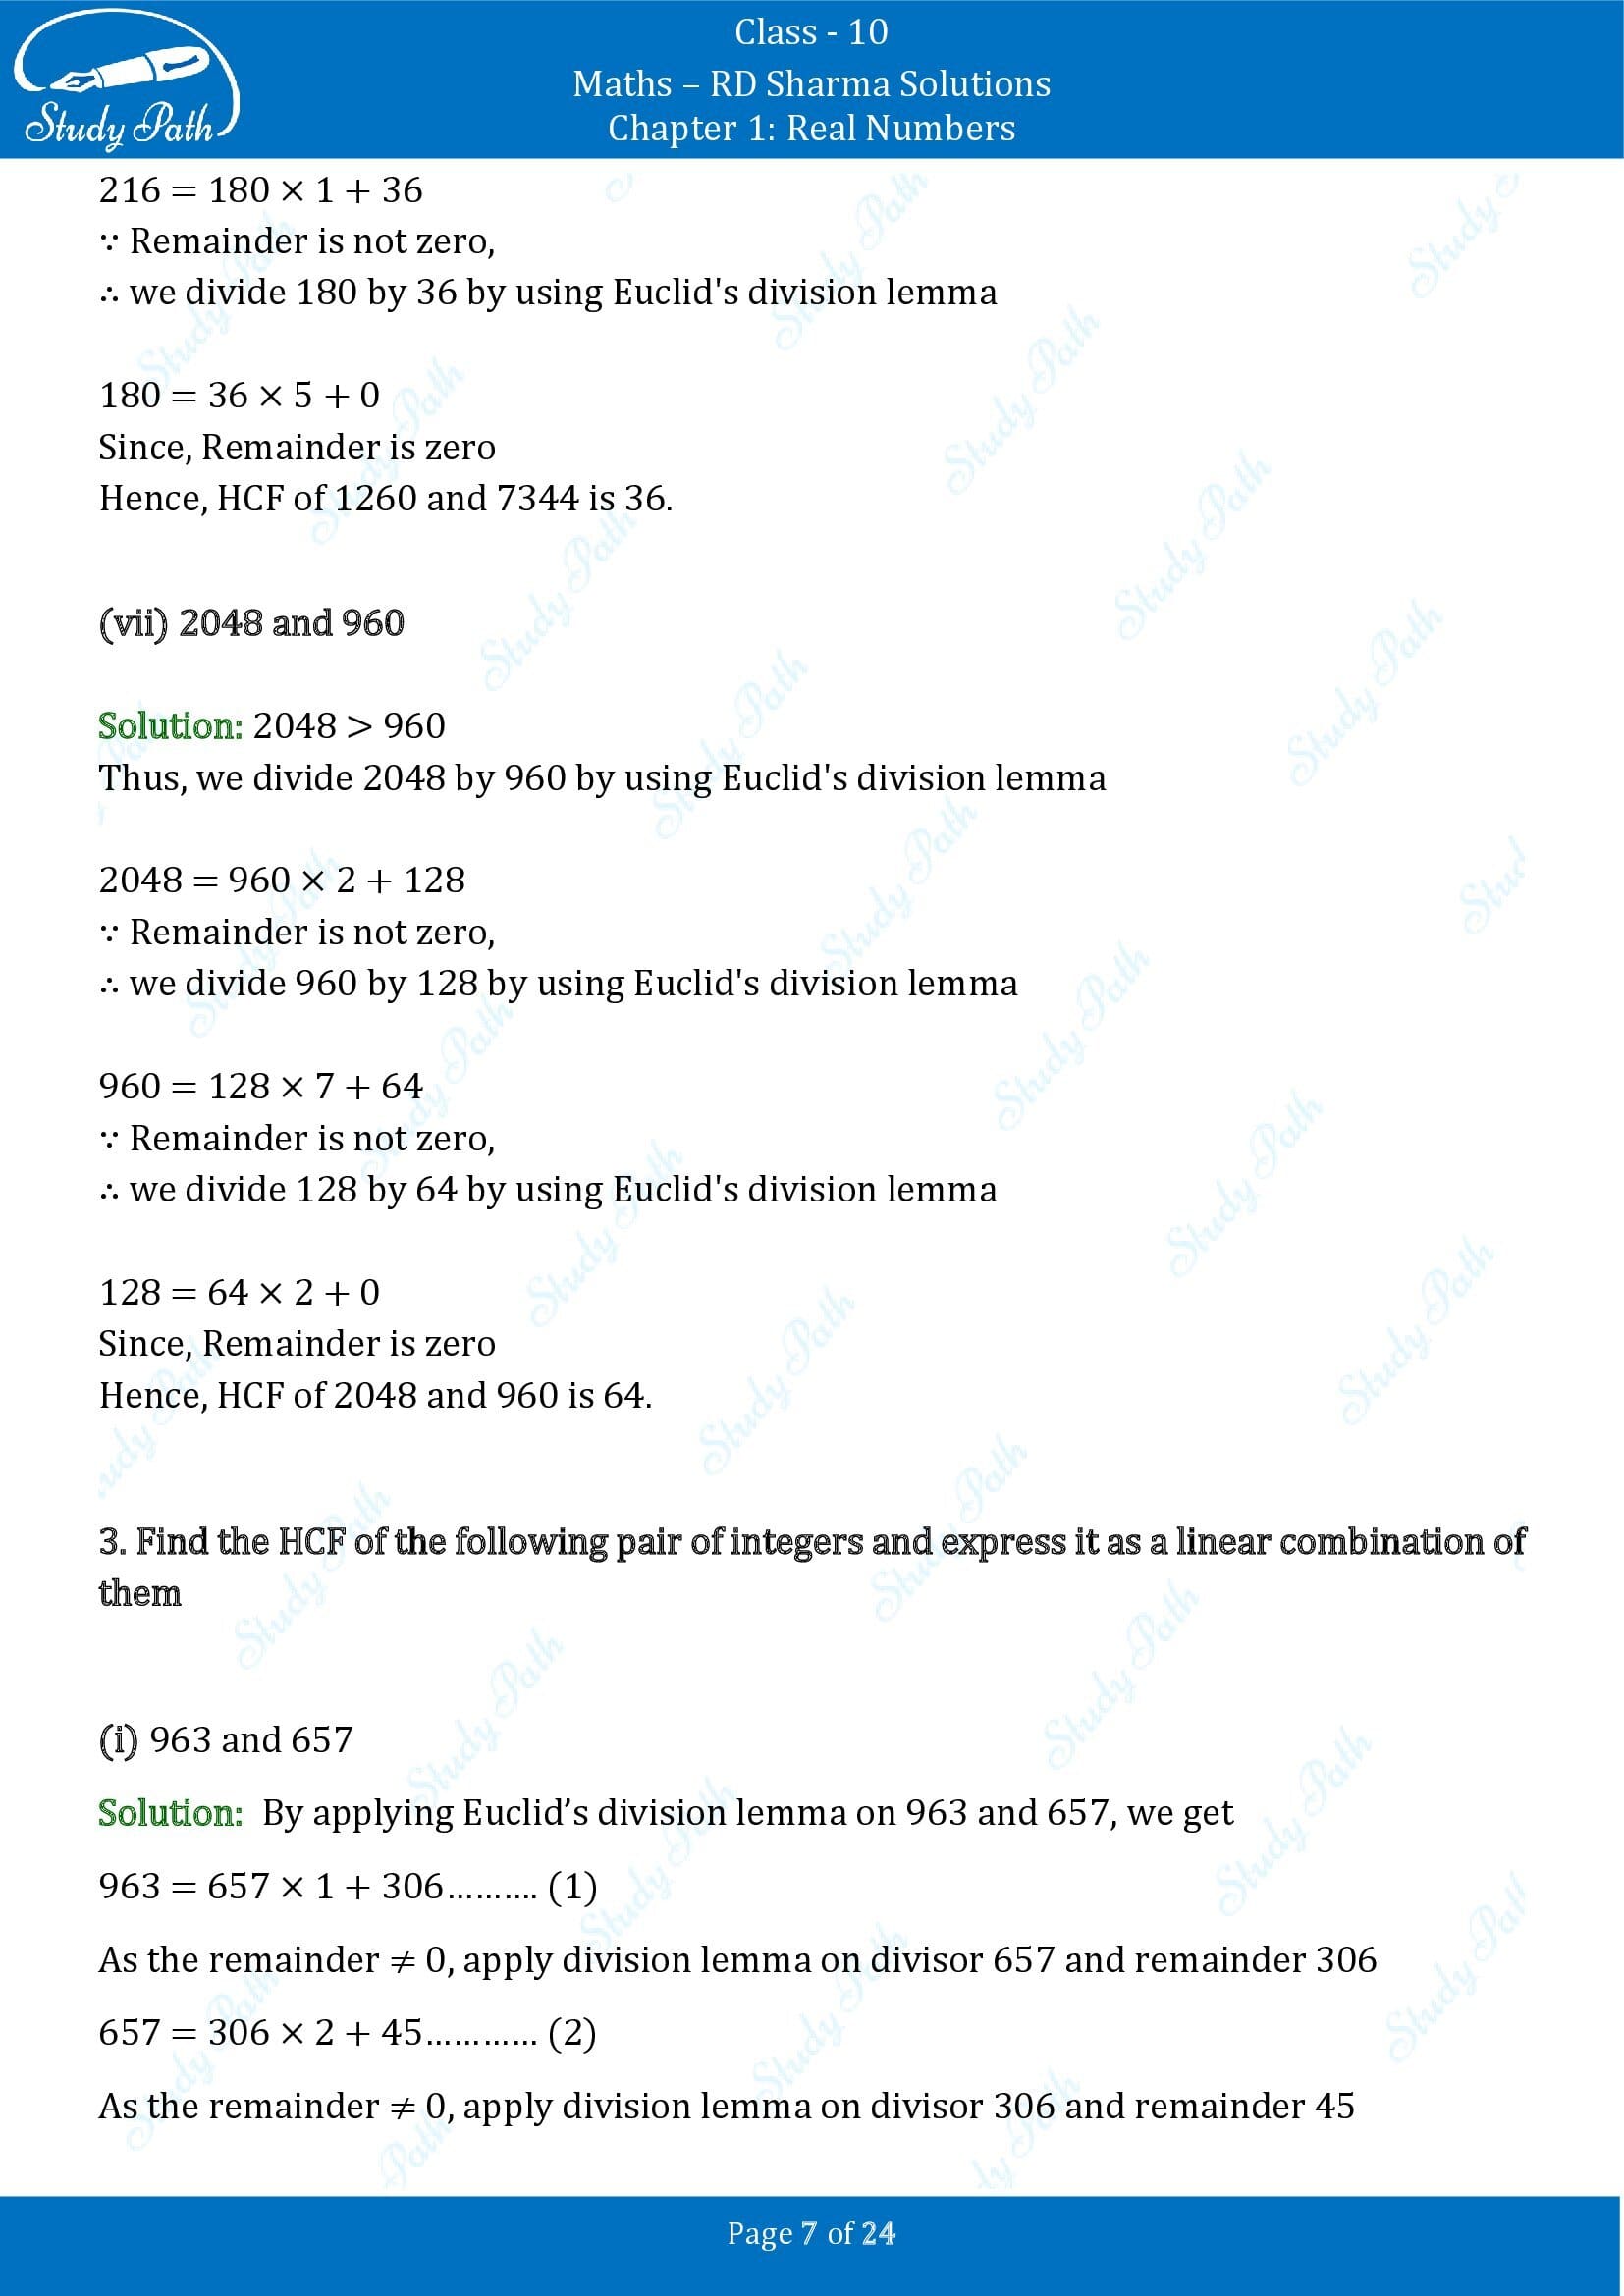 RD Sharma Solutions Class 10 Chapter 1 Real Numbers Exercise 1.2 00007